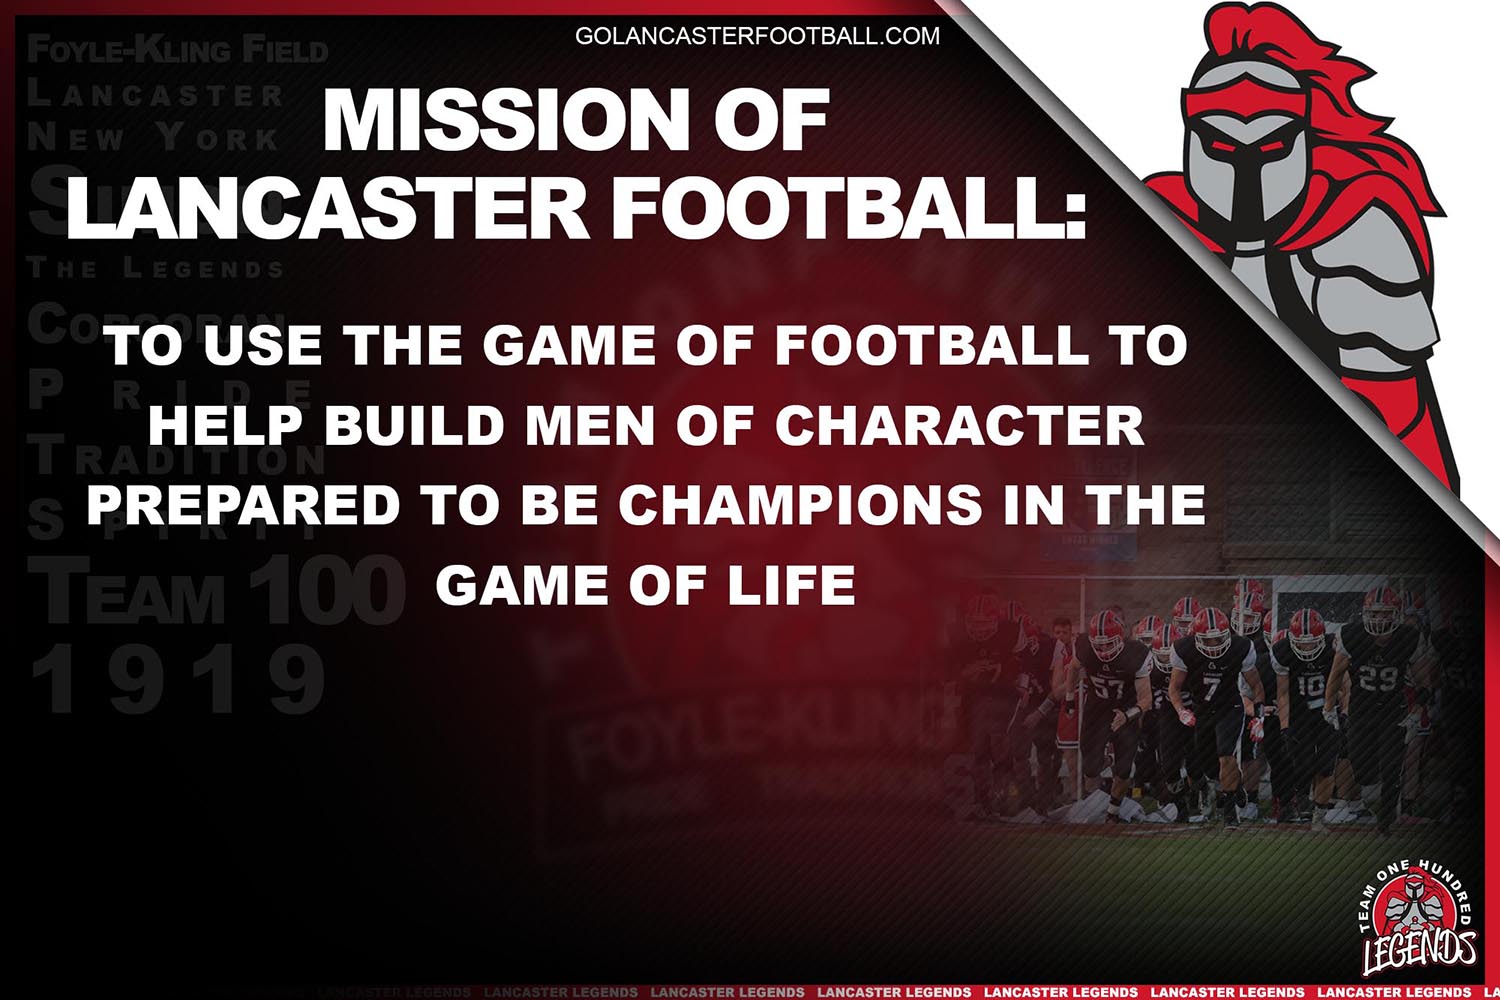 Mission of Lancaster Football: To use the game of football to help build men of character prepared to be champions in the game of life